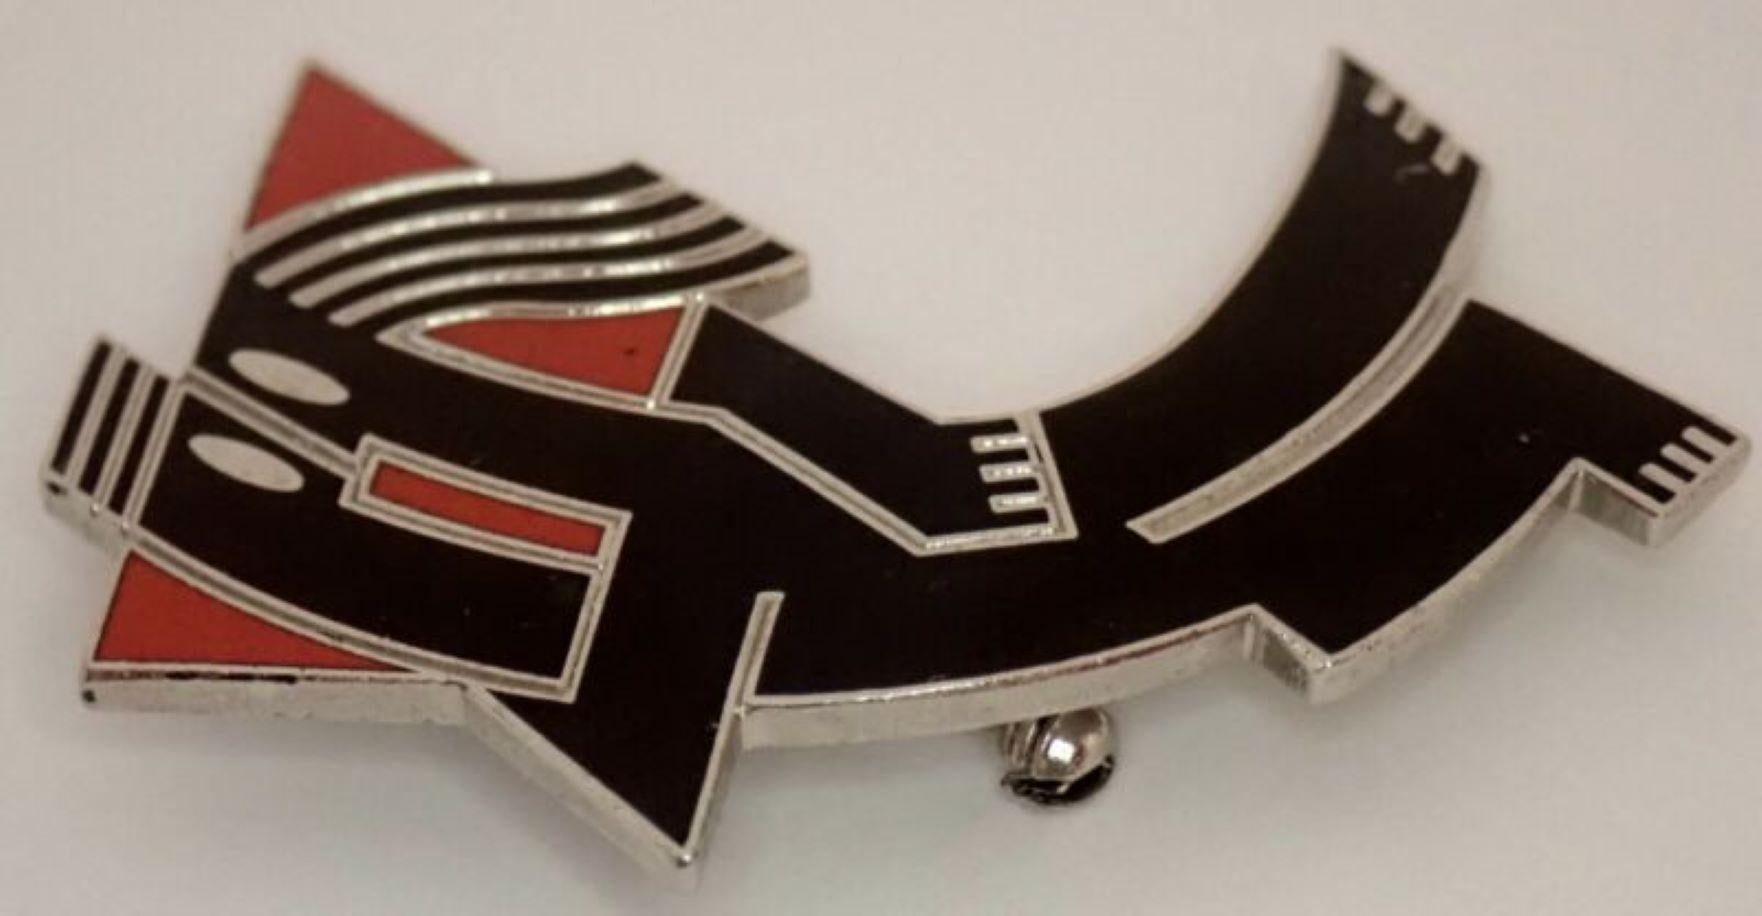 Iconic Designer Jerry Leibowitz for Acme Studios Enamel Lovers Vintage Brooch Pin. Approx. size: 2 1/8” x 1 3/4